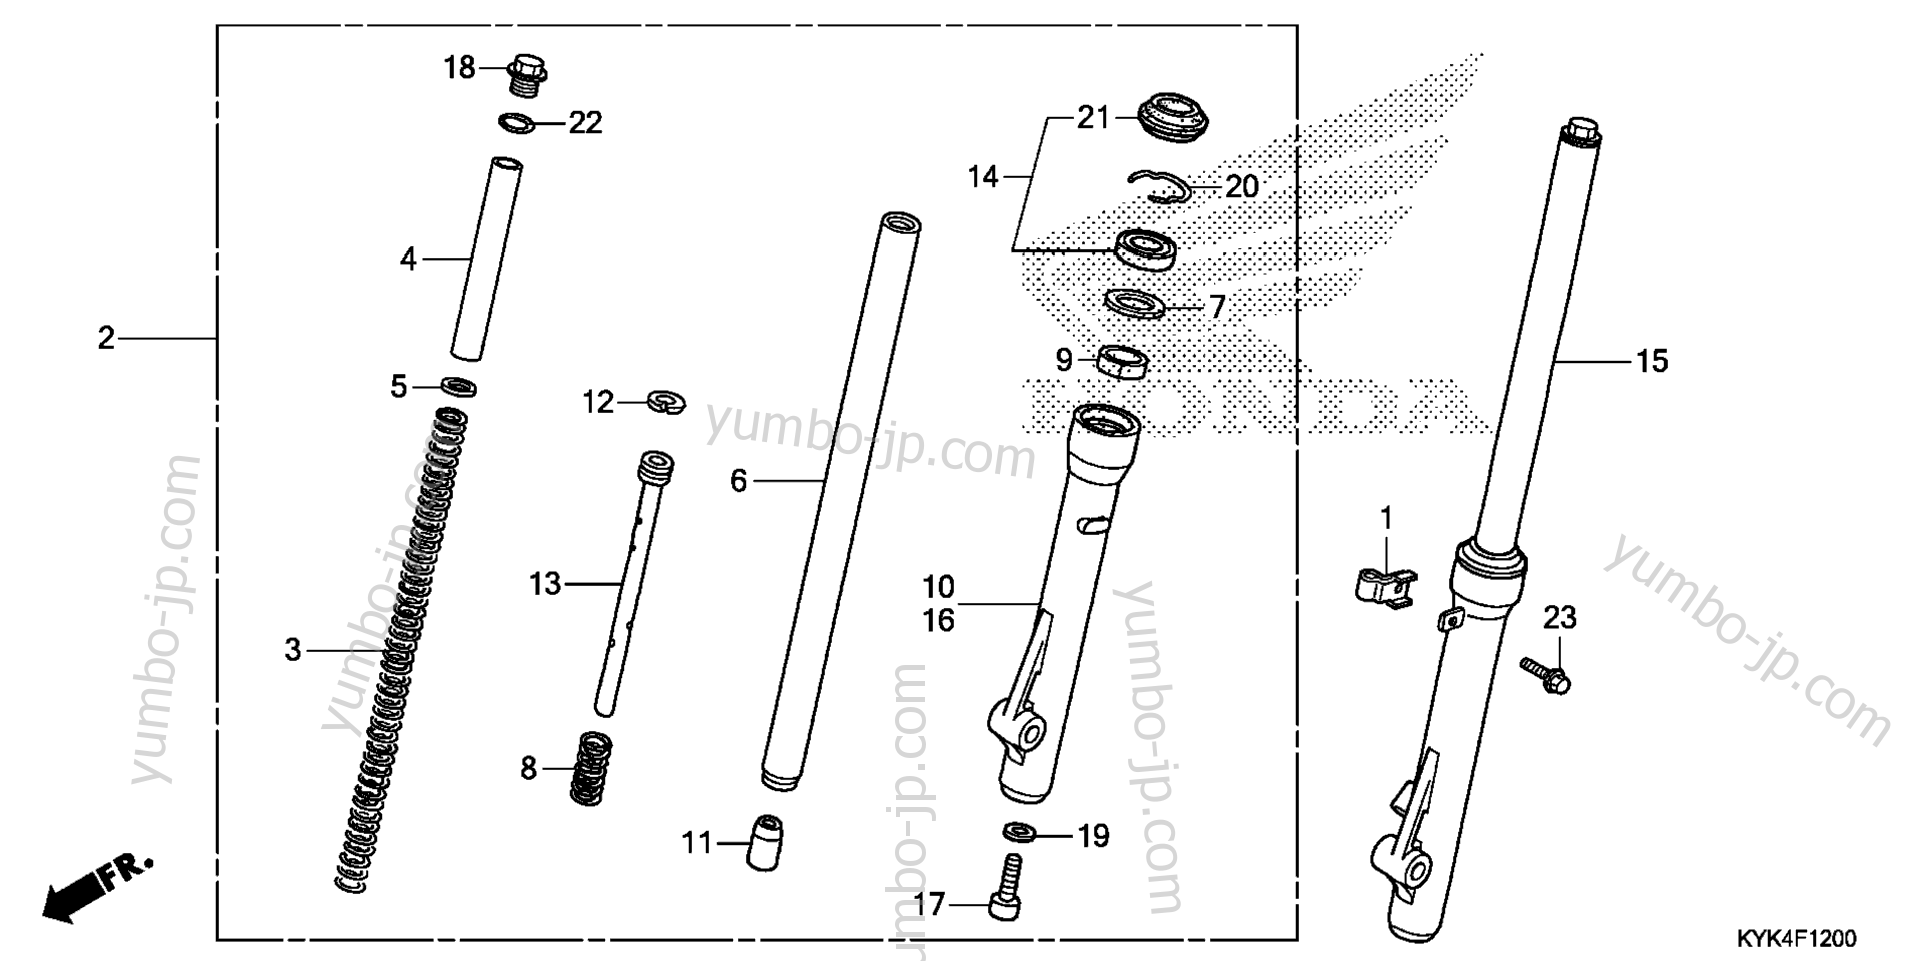 FRONT FORK for motorcycles HONDA CRF110F AC 2013 year